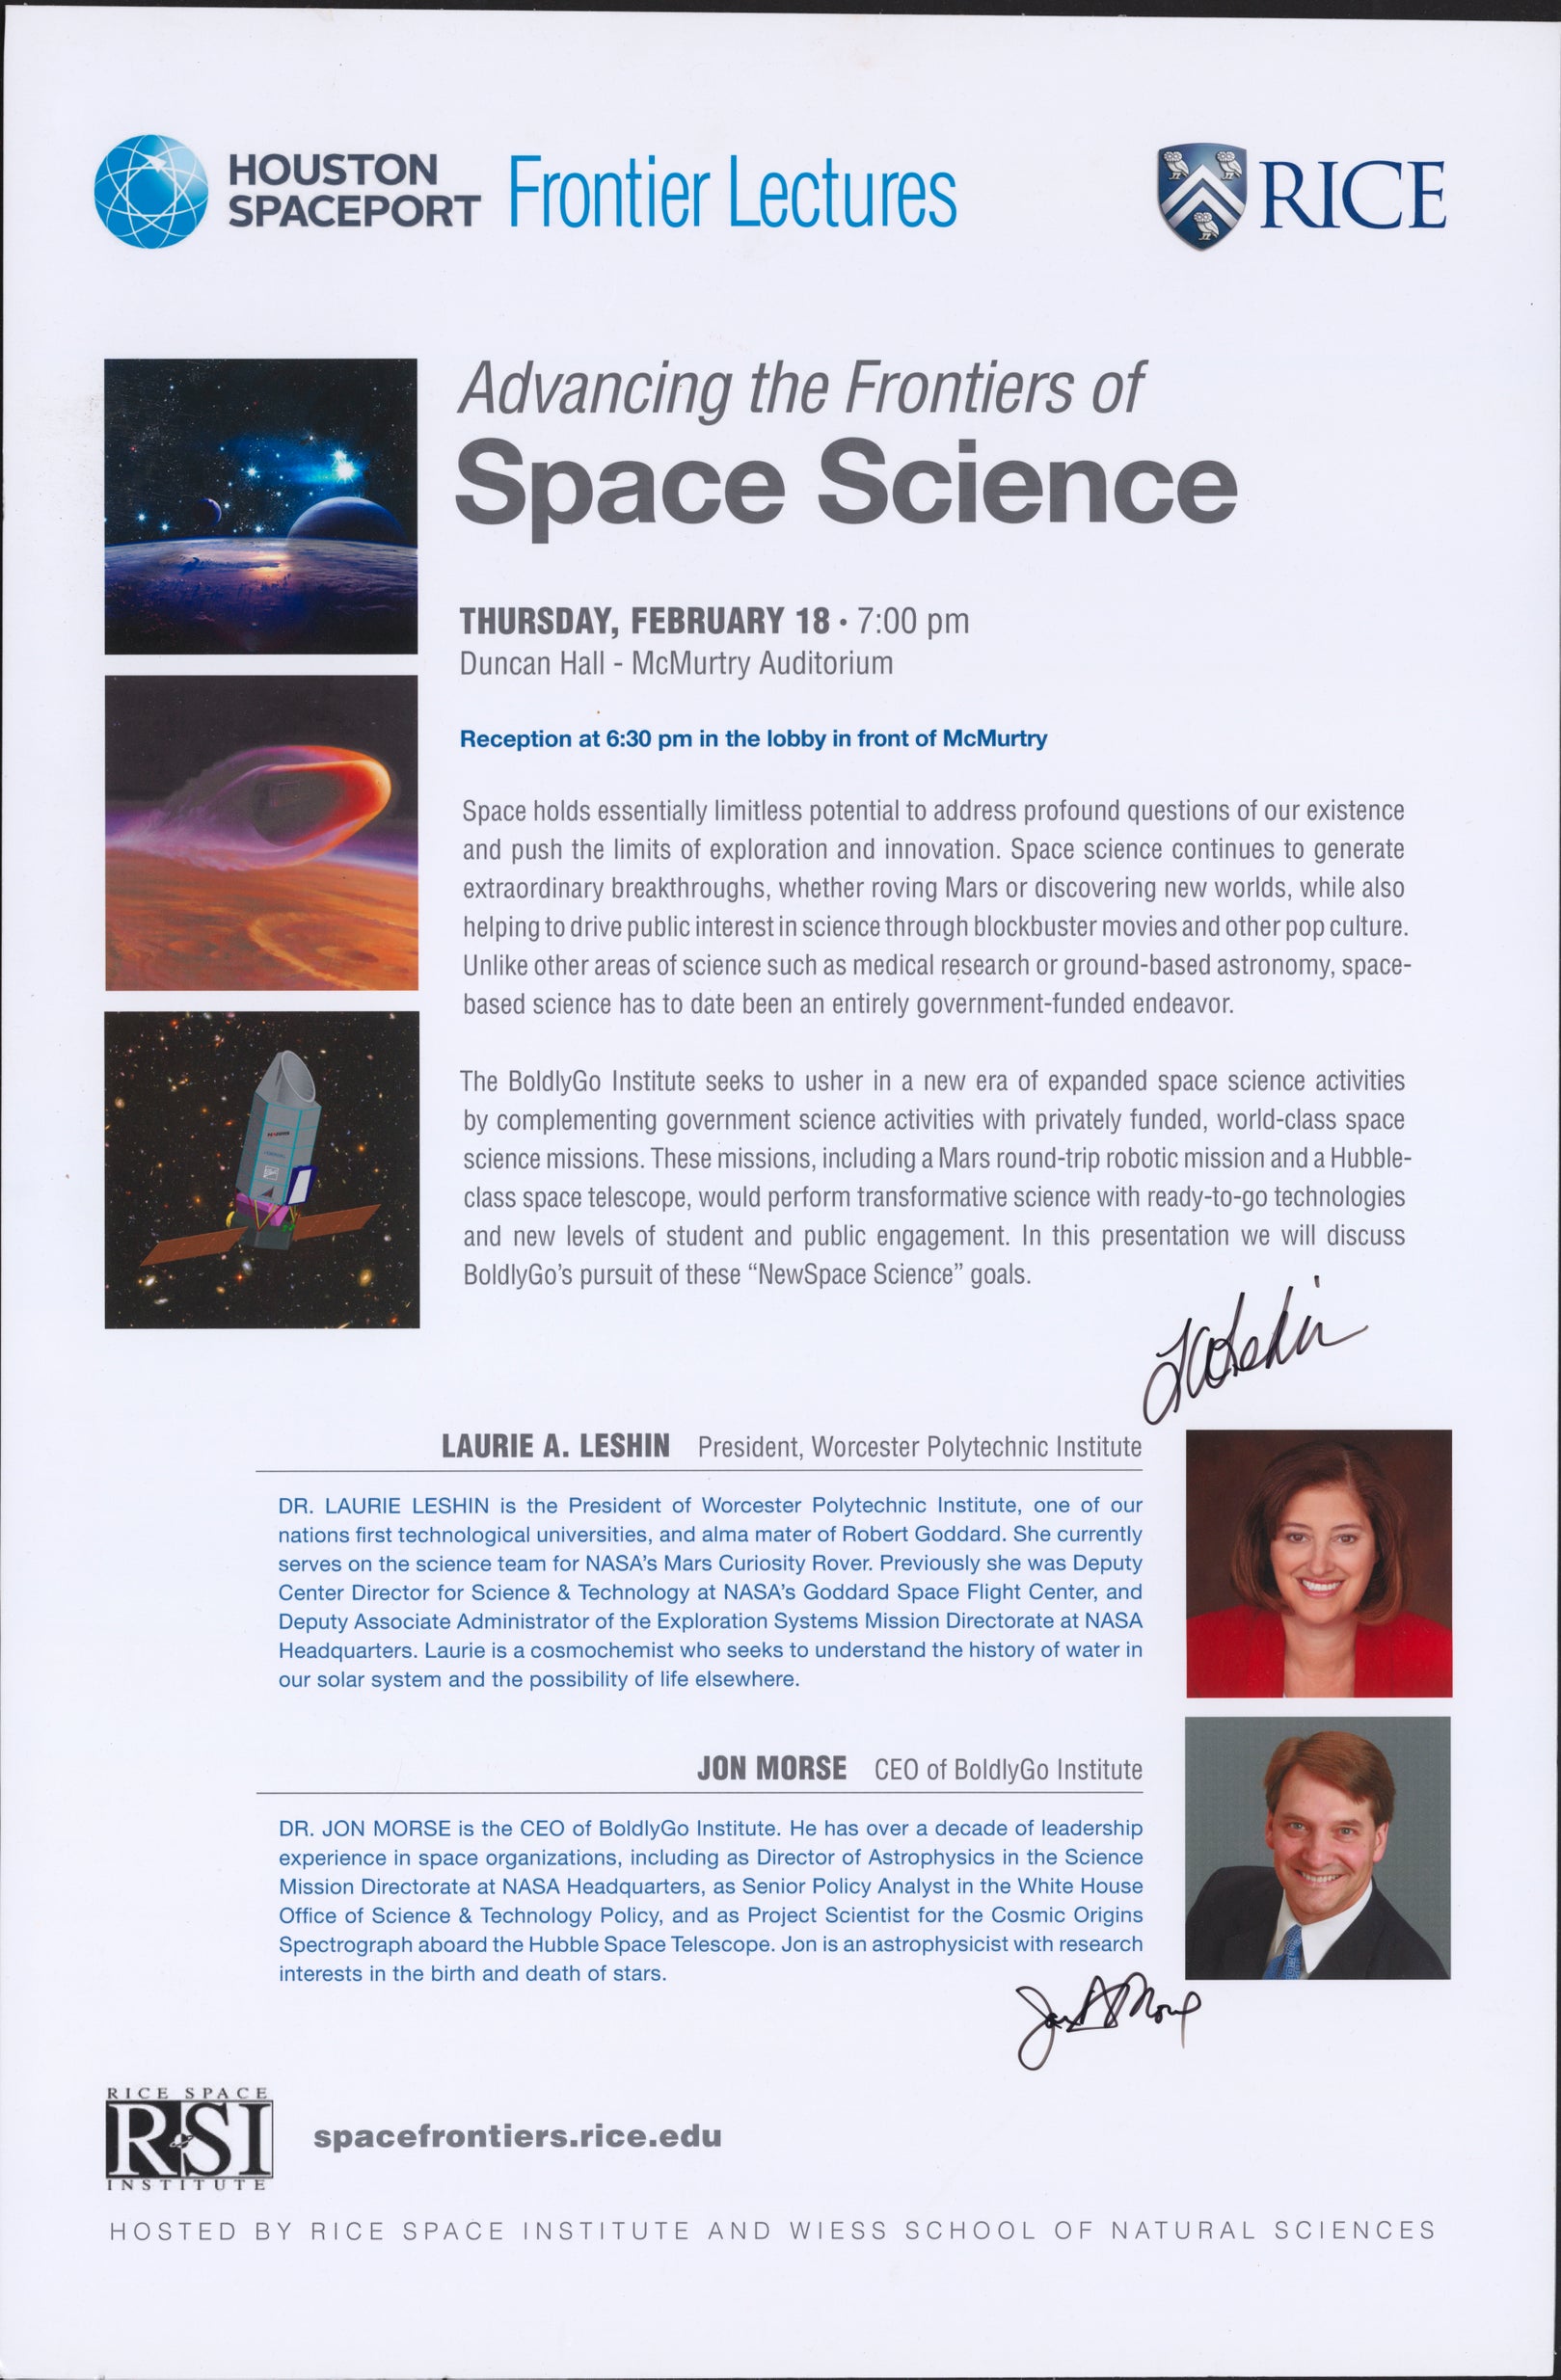 Poster of "Advancing the Frontiers of Space Science" by Laurie Leshin and Jon Morse